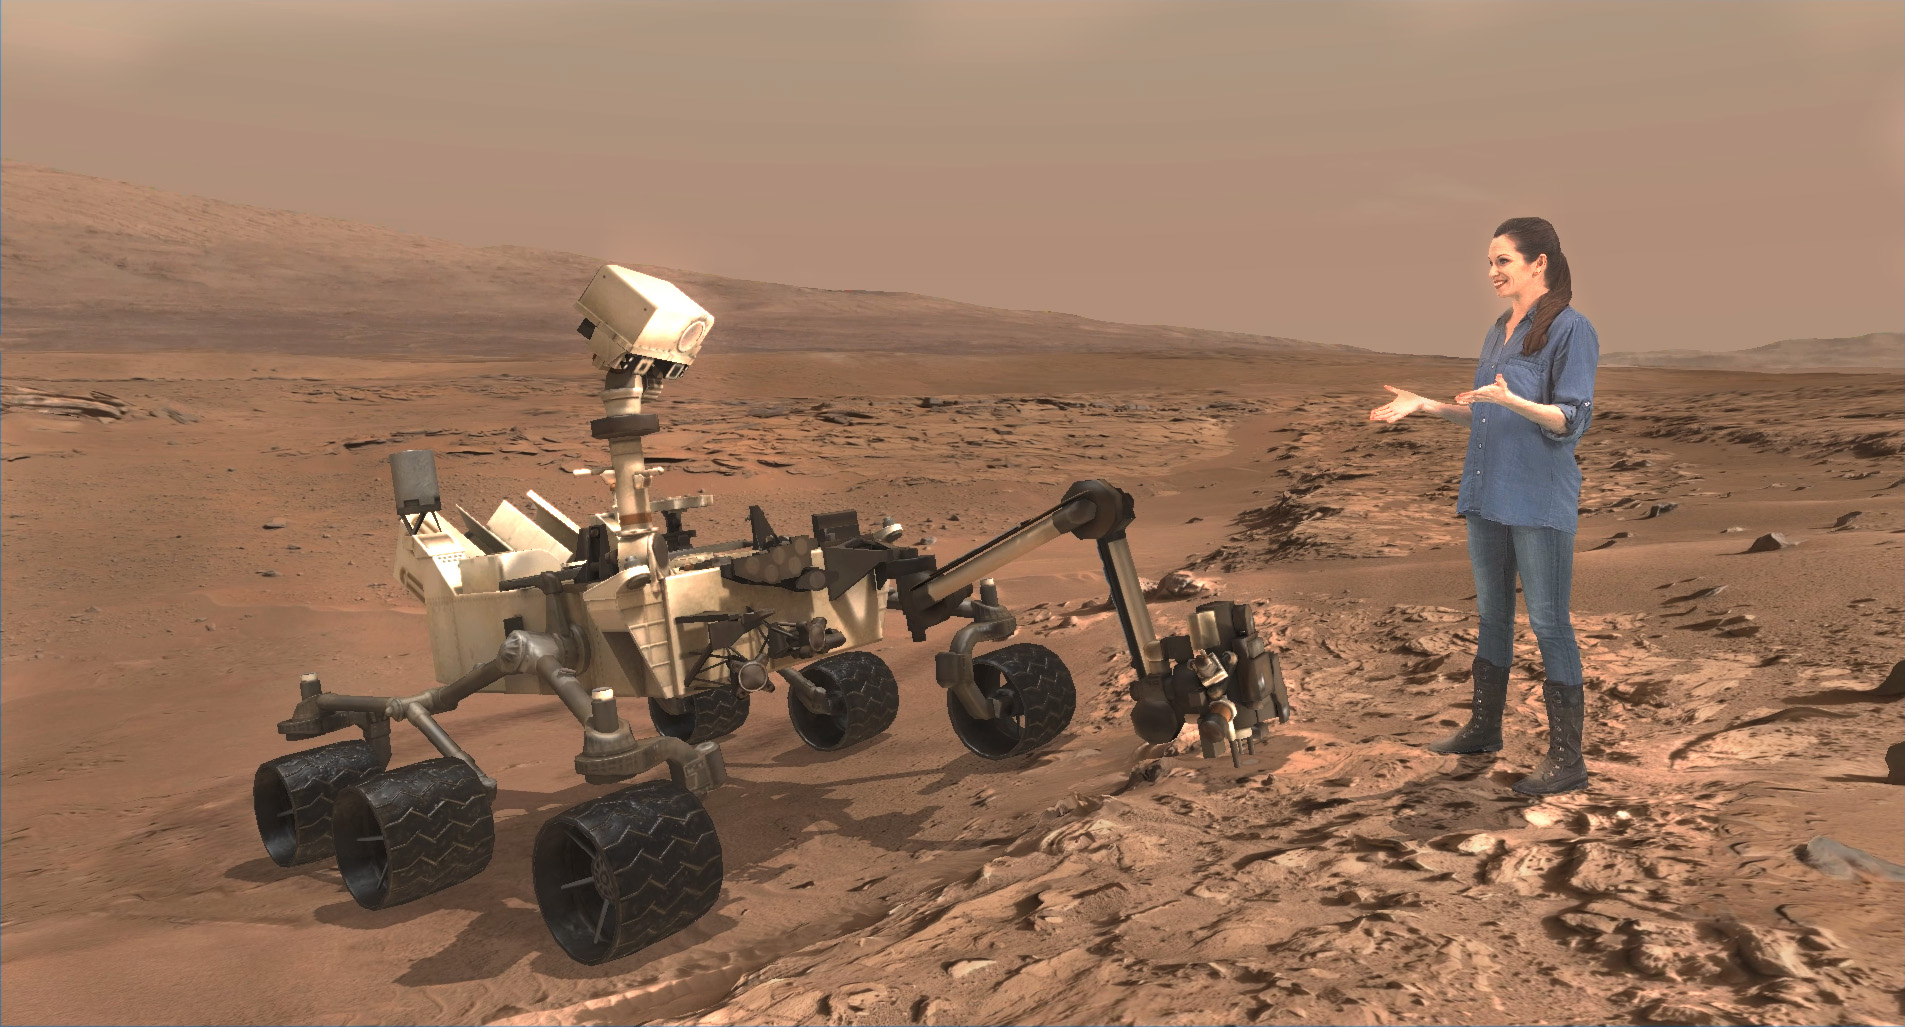 A scene from ‘Destination Mars’ of Erisa Hines and  NASA’s Curiosity Mars rover with Mount Sharp Gale crater rim in the distance. The new, limited time interactive exhibit is now showing at the Kennedy Space Center visitor complex in Florida through Jan 1, 2017. Credit: NASA/JPL/Microsoft 